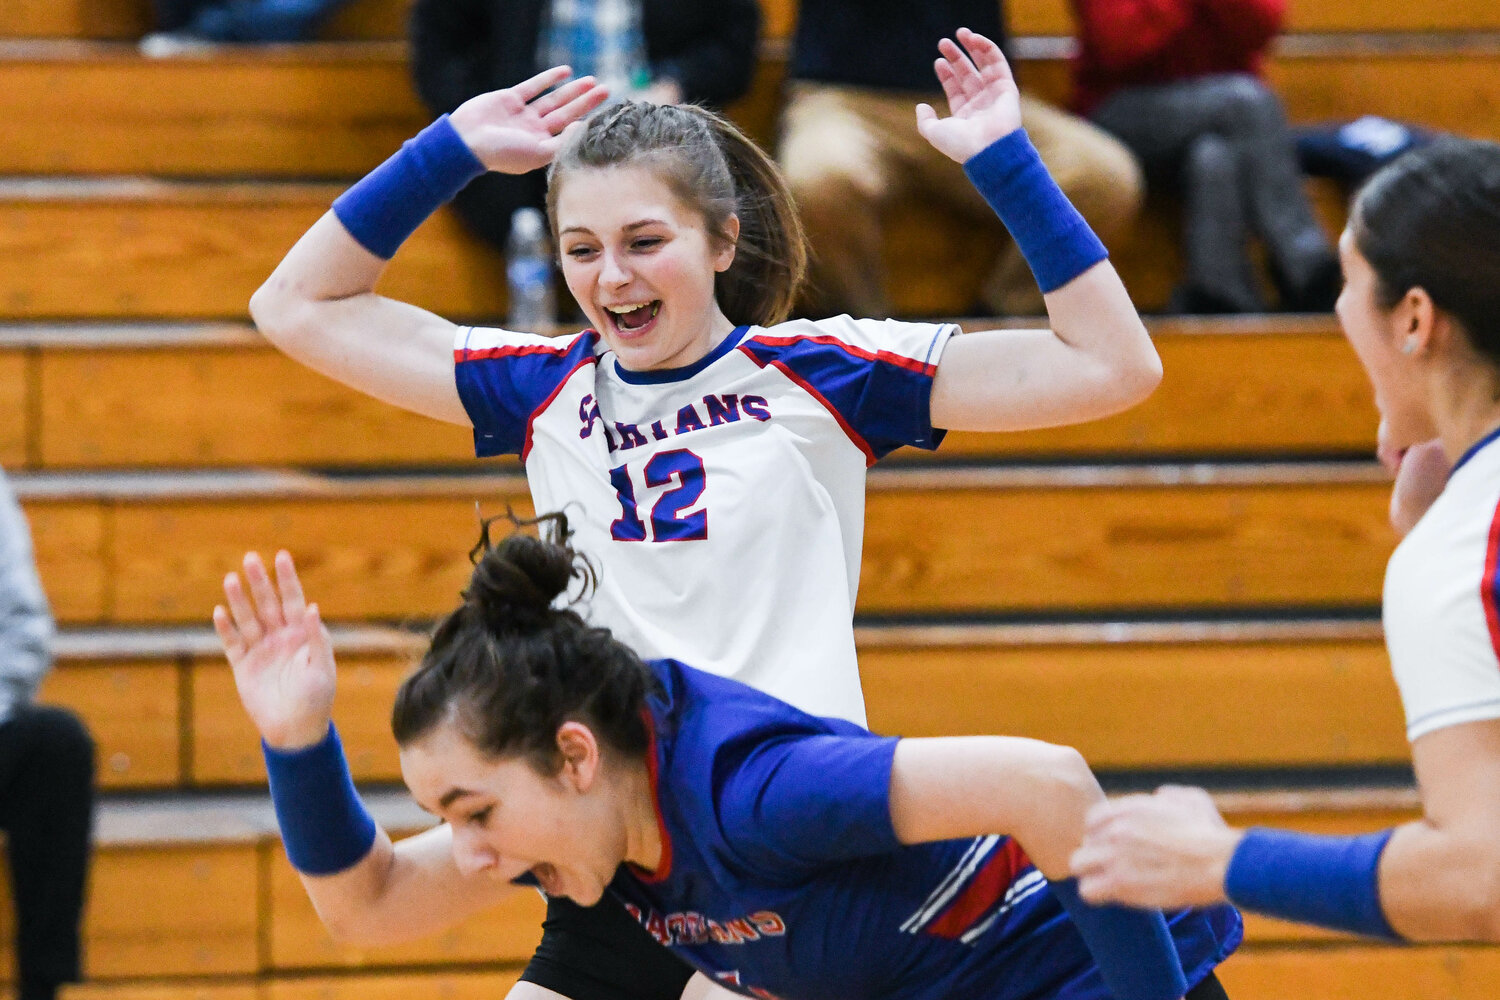 New Hartford players Makenzie Desmarais (12), shown during a contest against Rome Free Academy during the 2022-23 season, was named the Tri-Valley League Player of the Year.